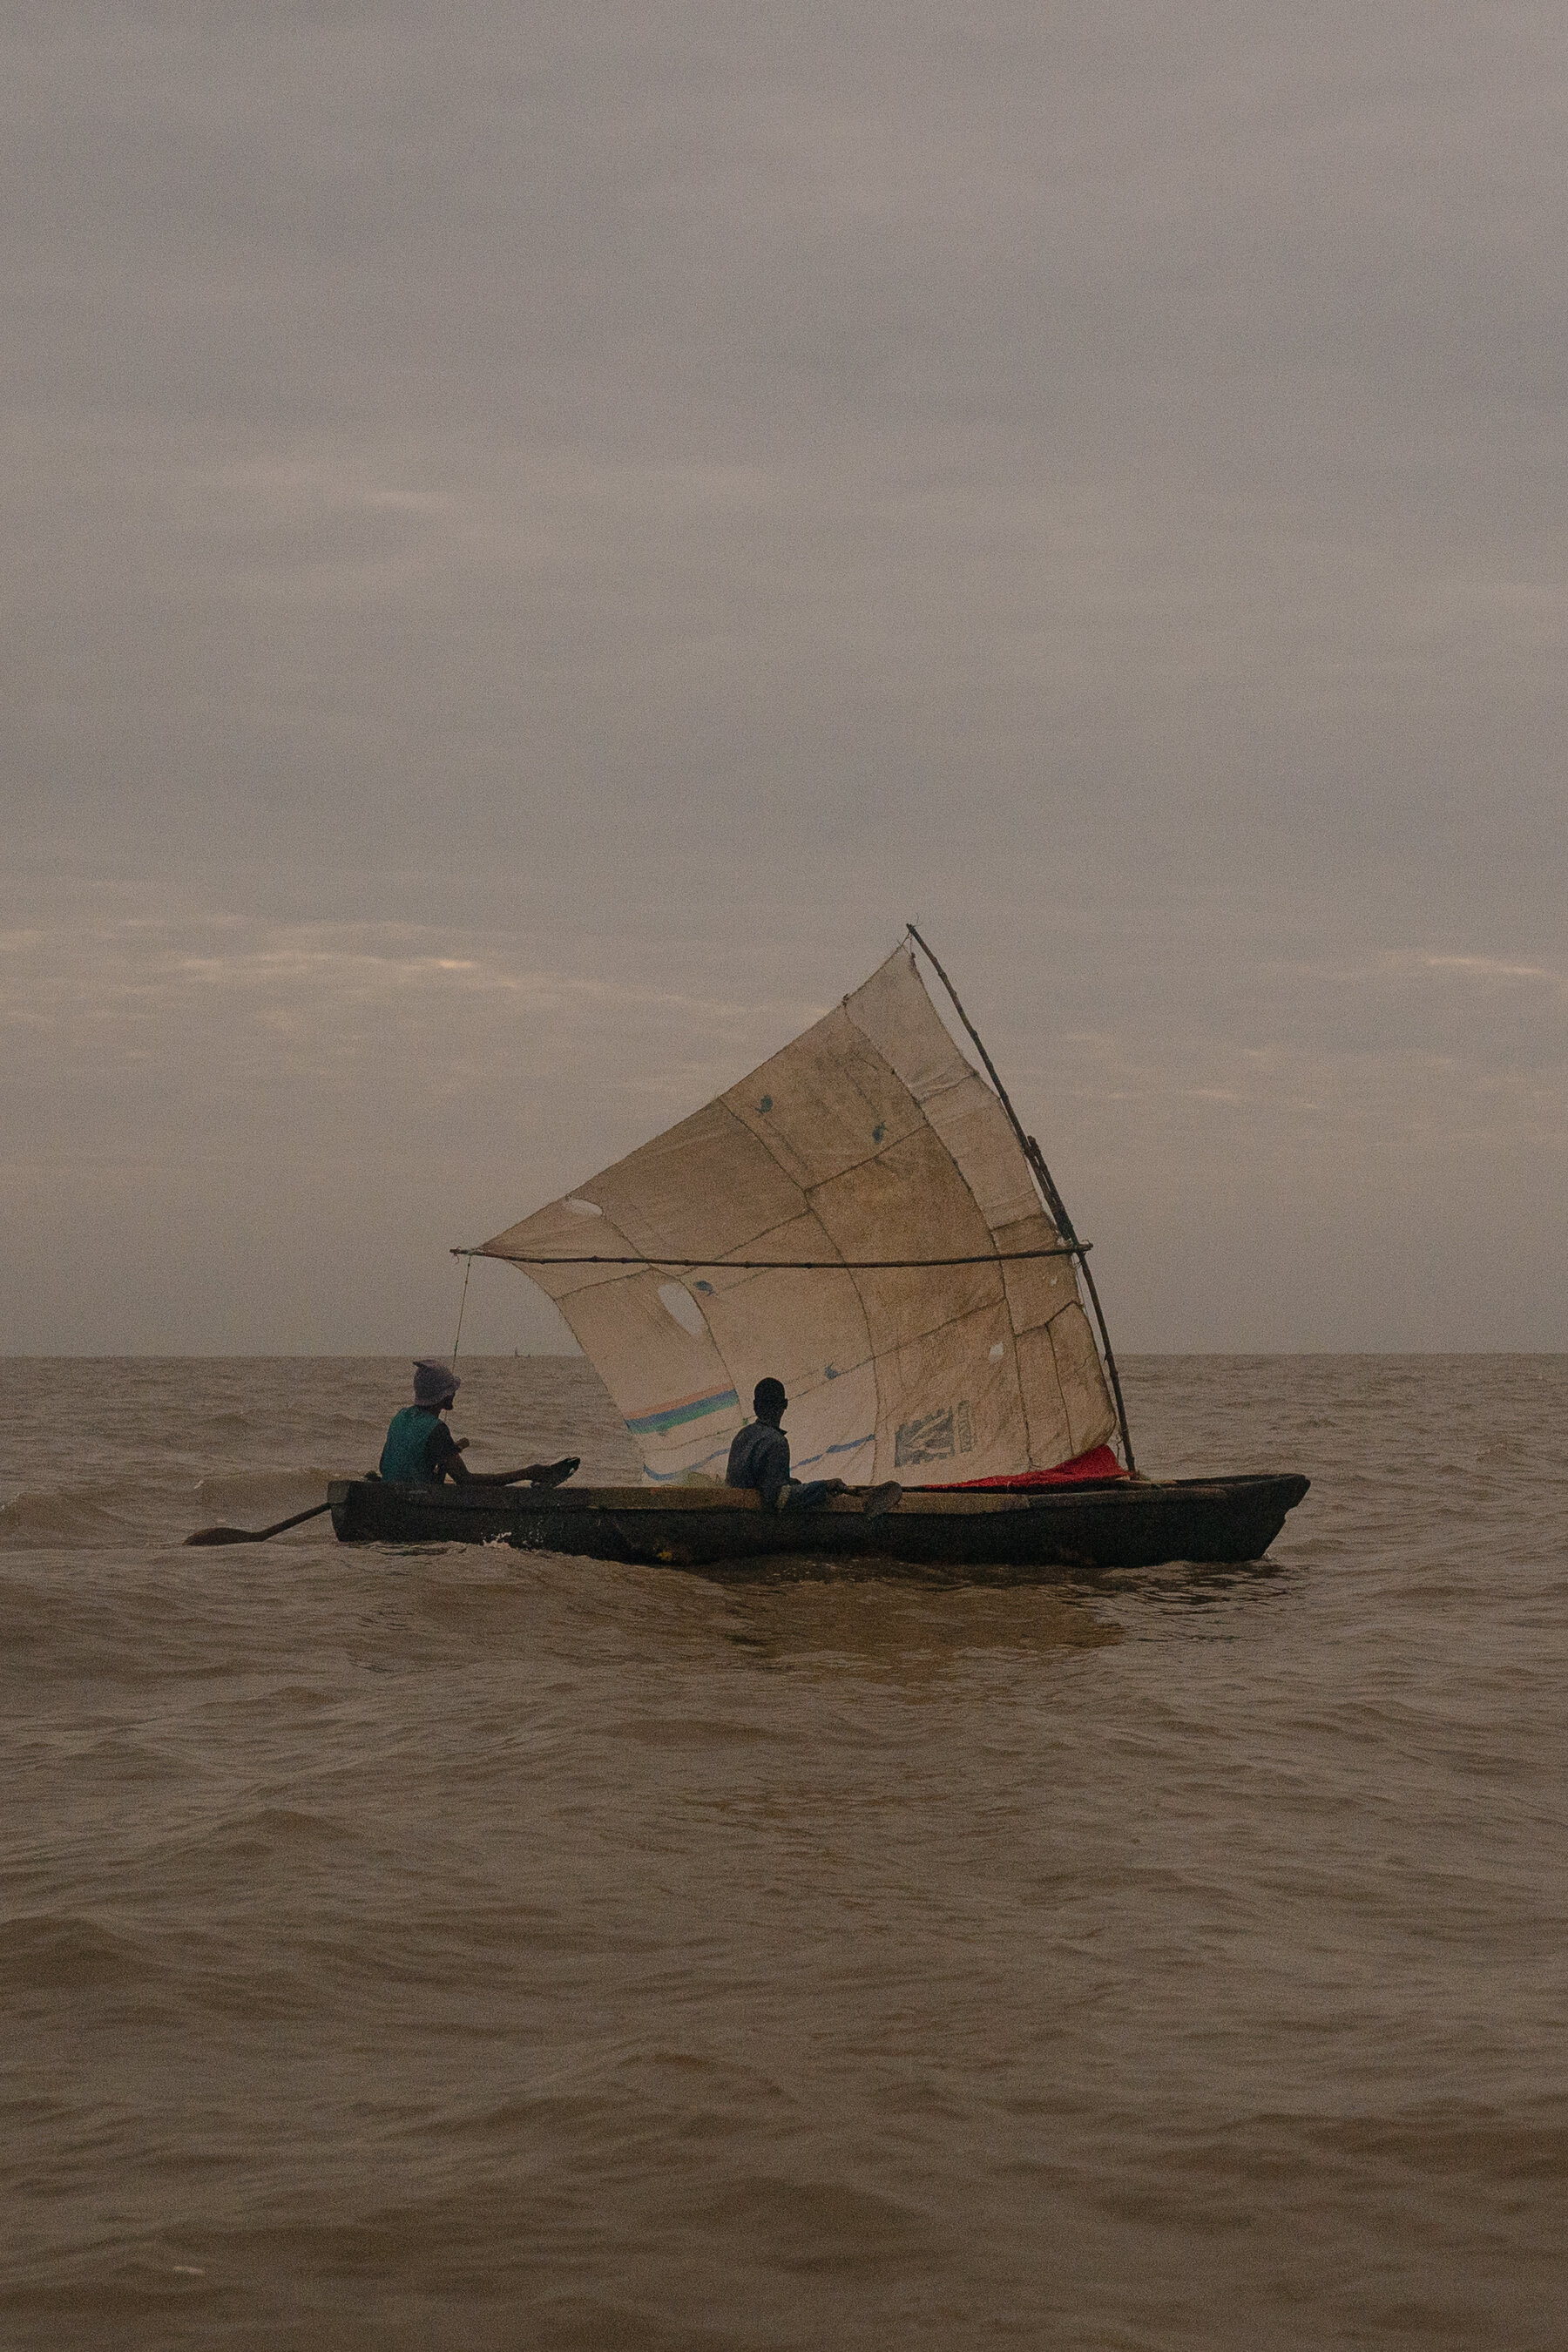 Two people on the open sea in a small boat with a tattered sail.